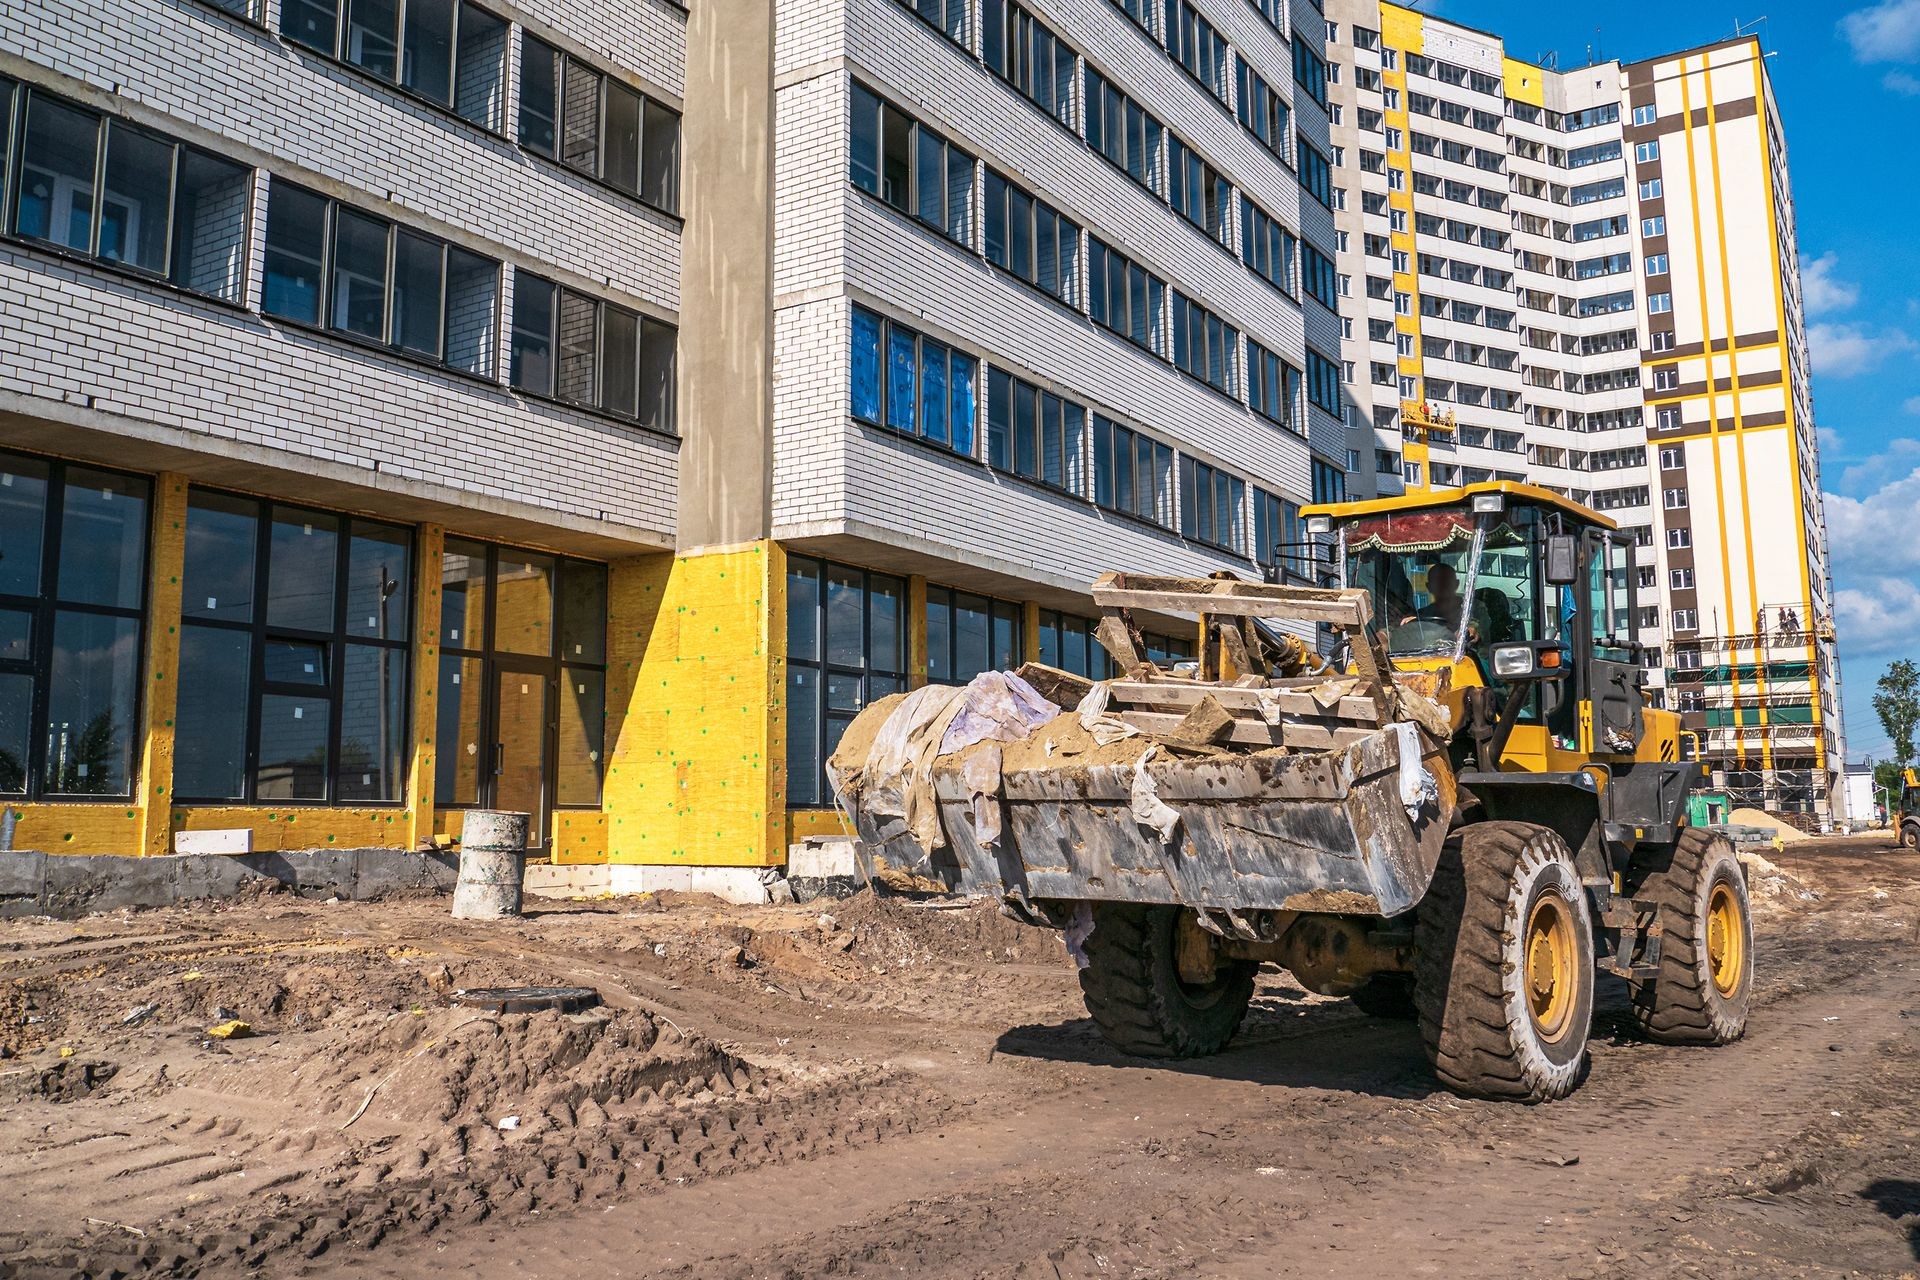 Bulldozer excavator carrying construction debris in bucket on construction site with new building on background, industrial machinery at work.